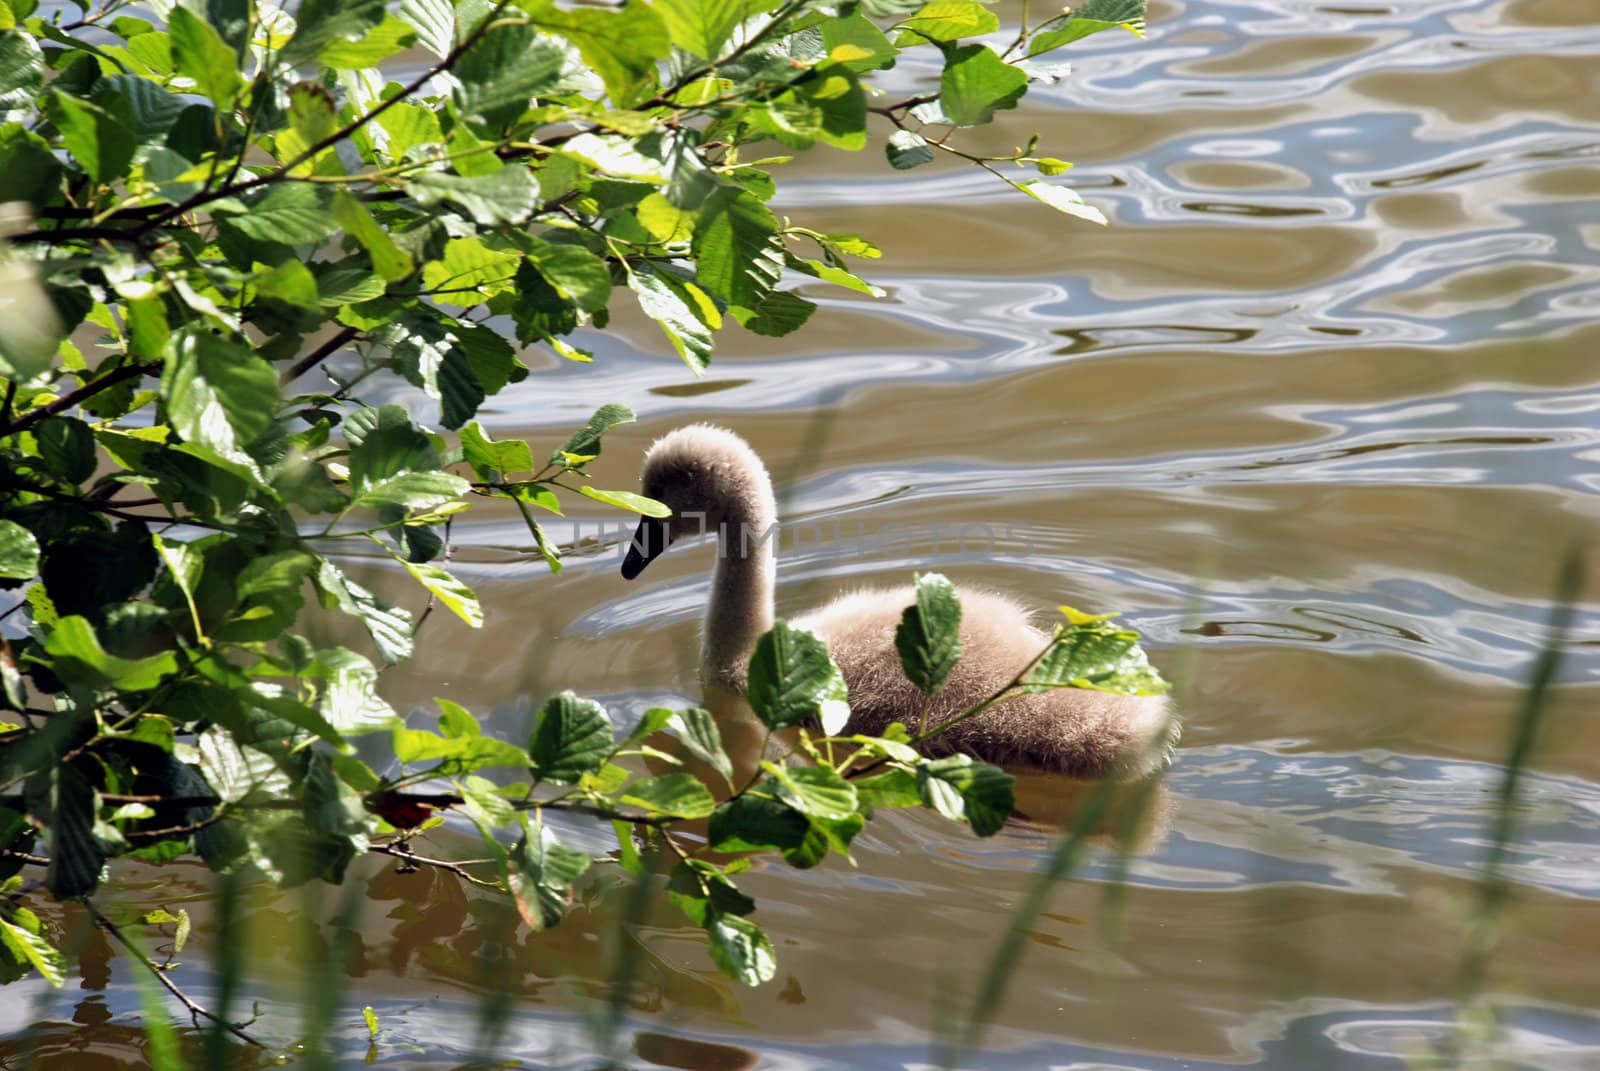 Little swan chick floating in riply summer lake